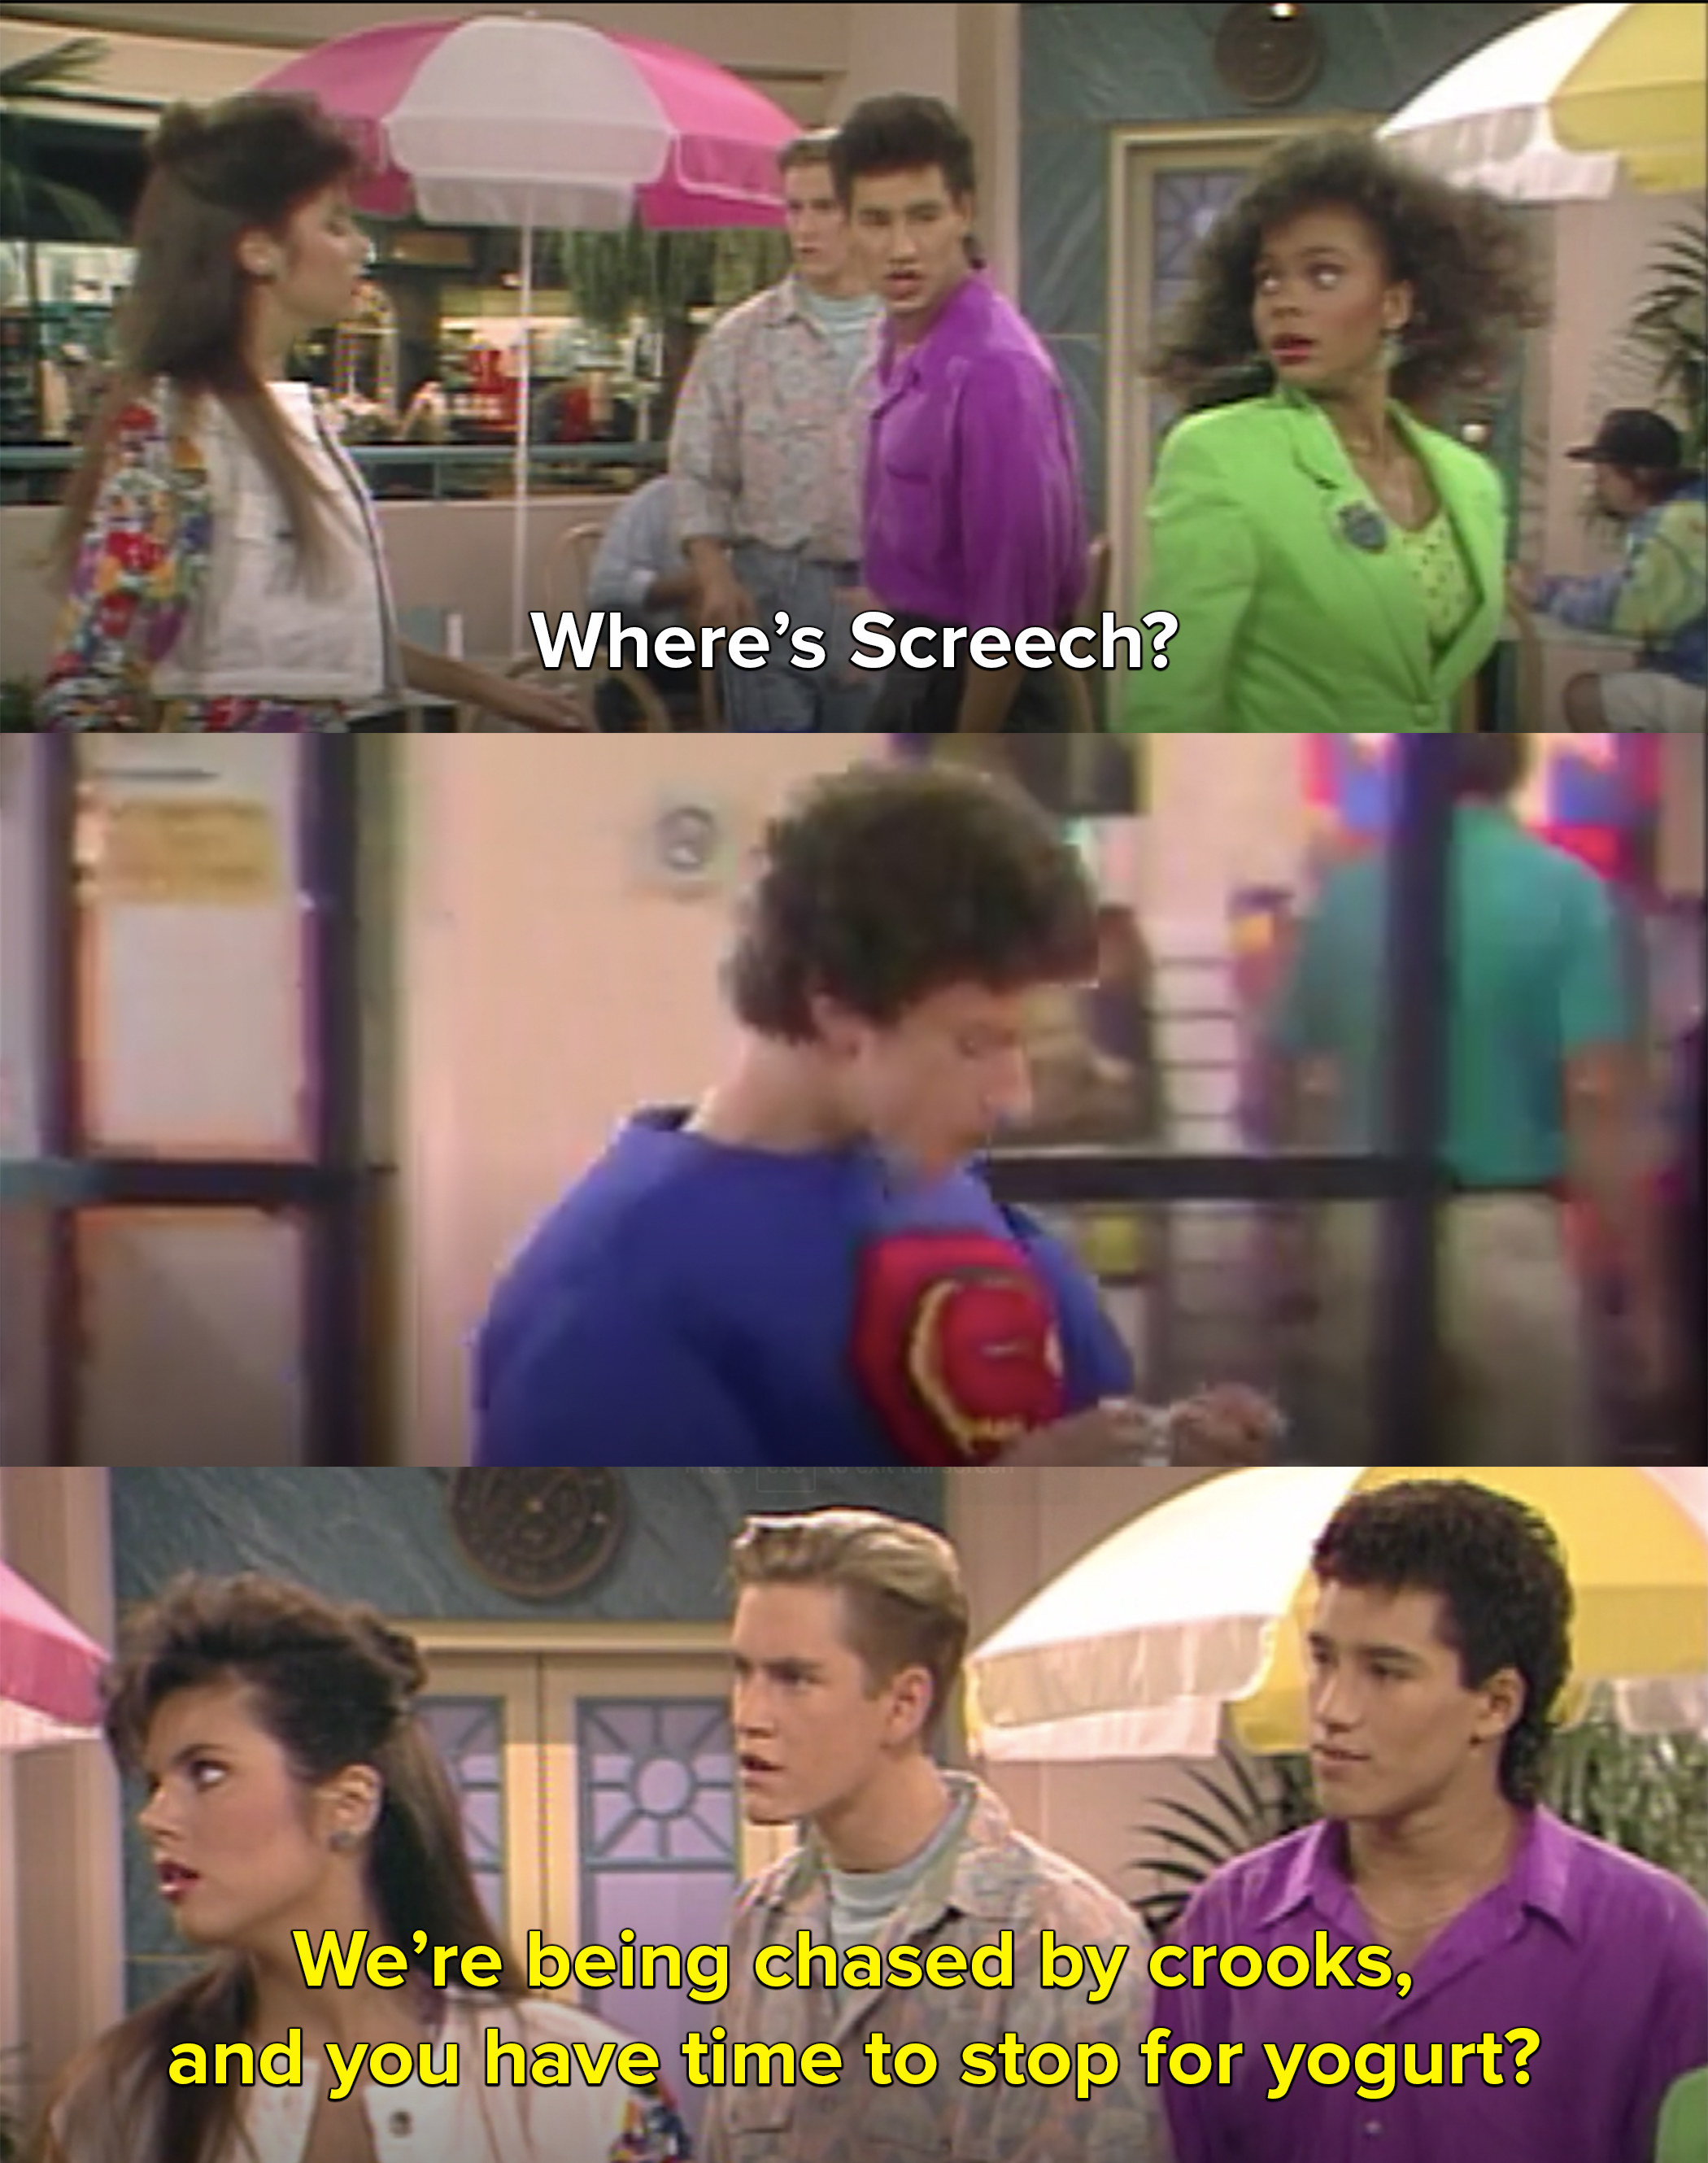 Zack is appalled that Screech found time to stop for yogurt